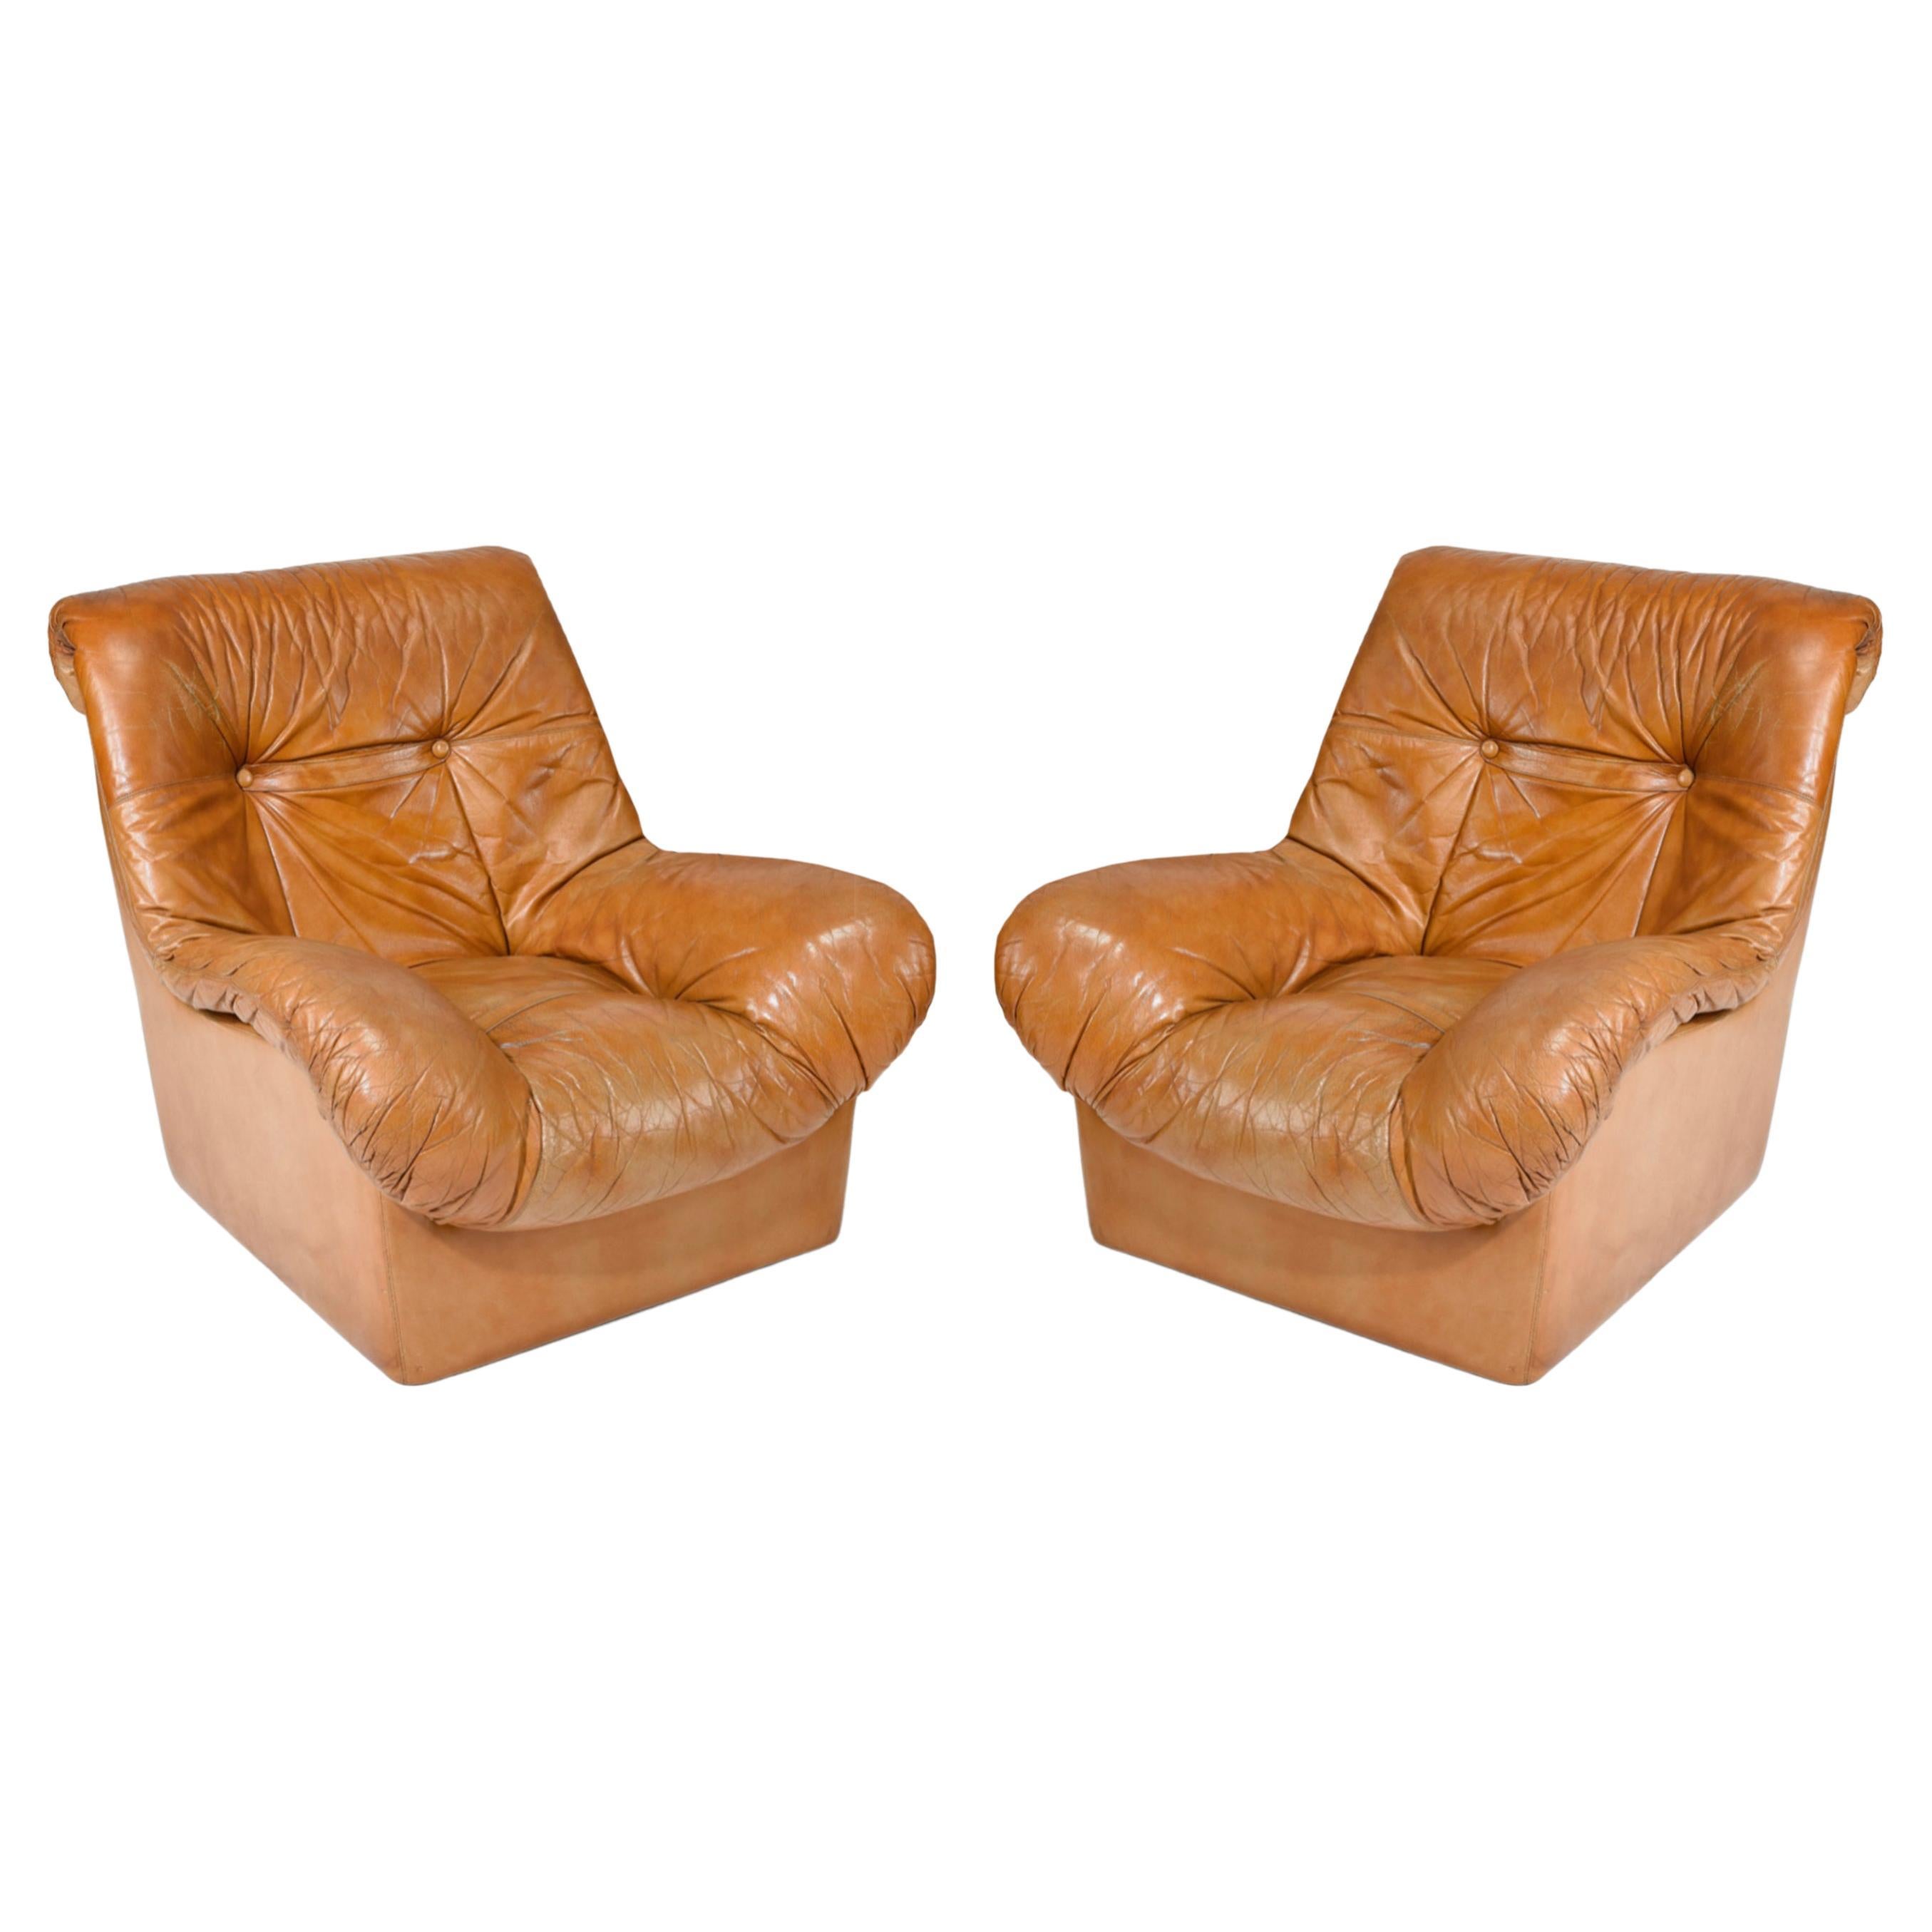 Woodwork Pair Mid Century Scandinavian Danish modern Tan Leather Puffy Lounge Chairs For Sale